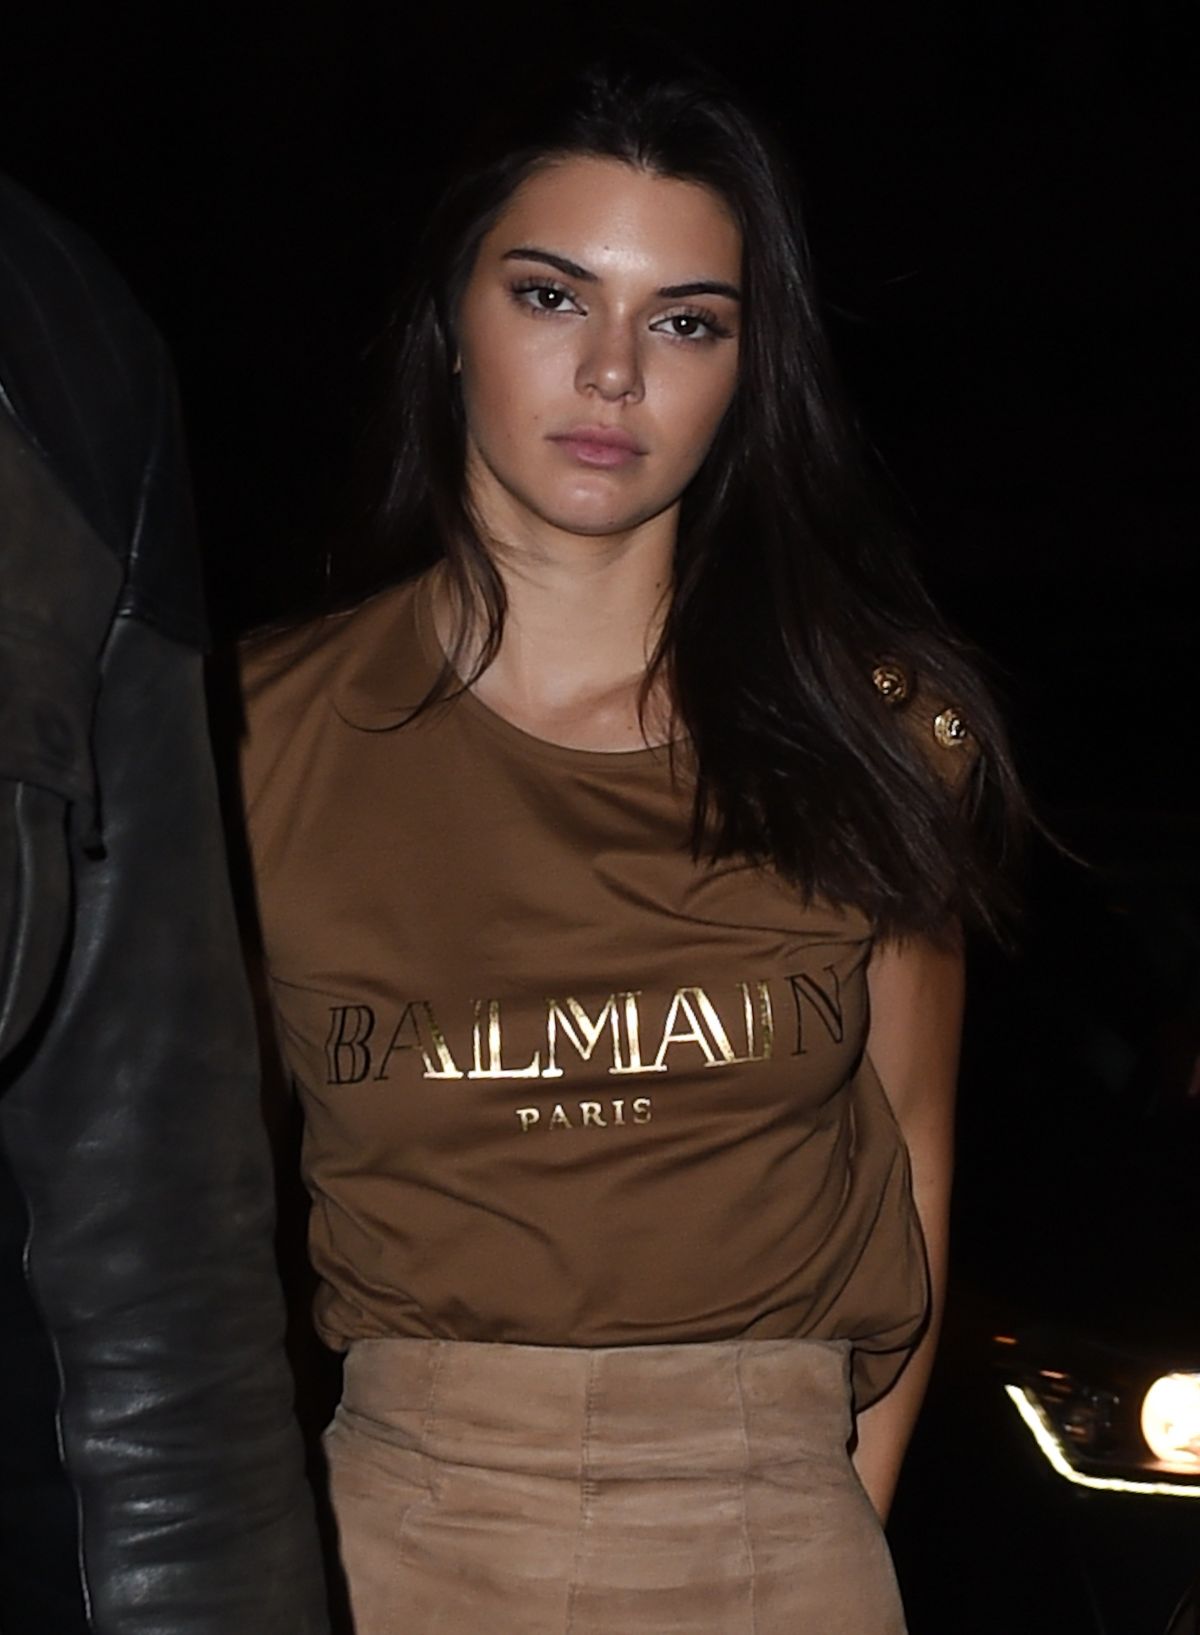 KENDALL JENNER at Balmain Fashion Show After-party in Paris 10/01/2015 ...